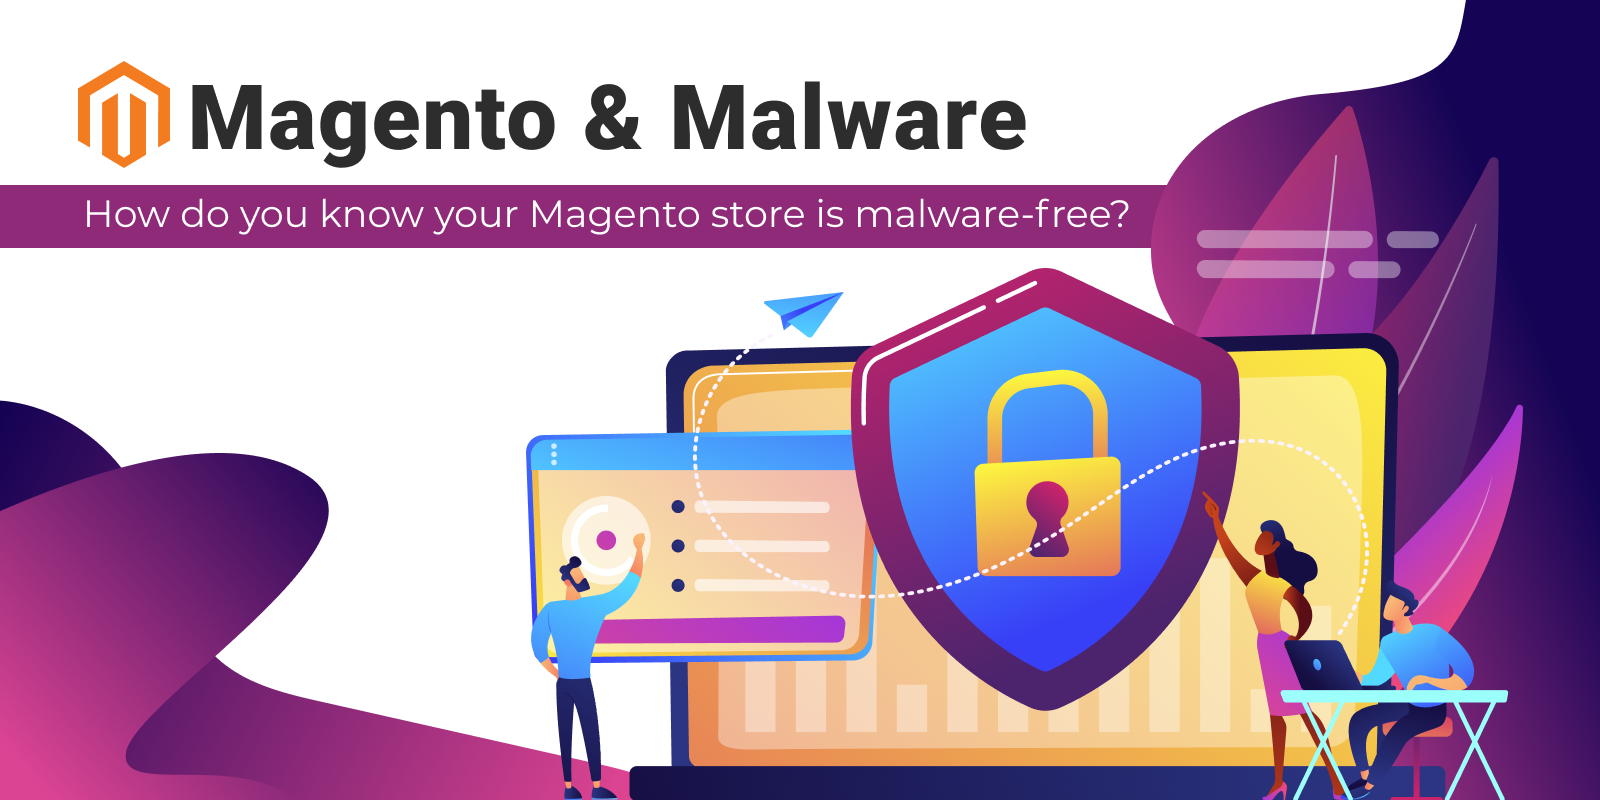 How to check the Magento store security for free? Use online malware scanners